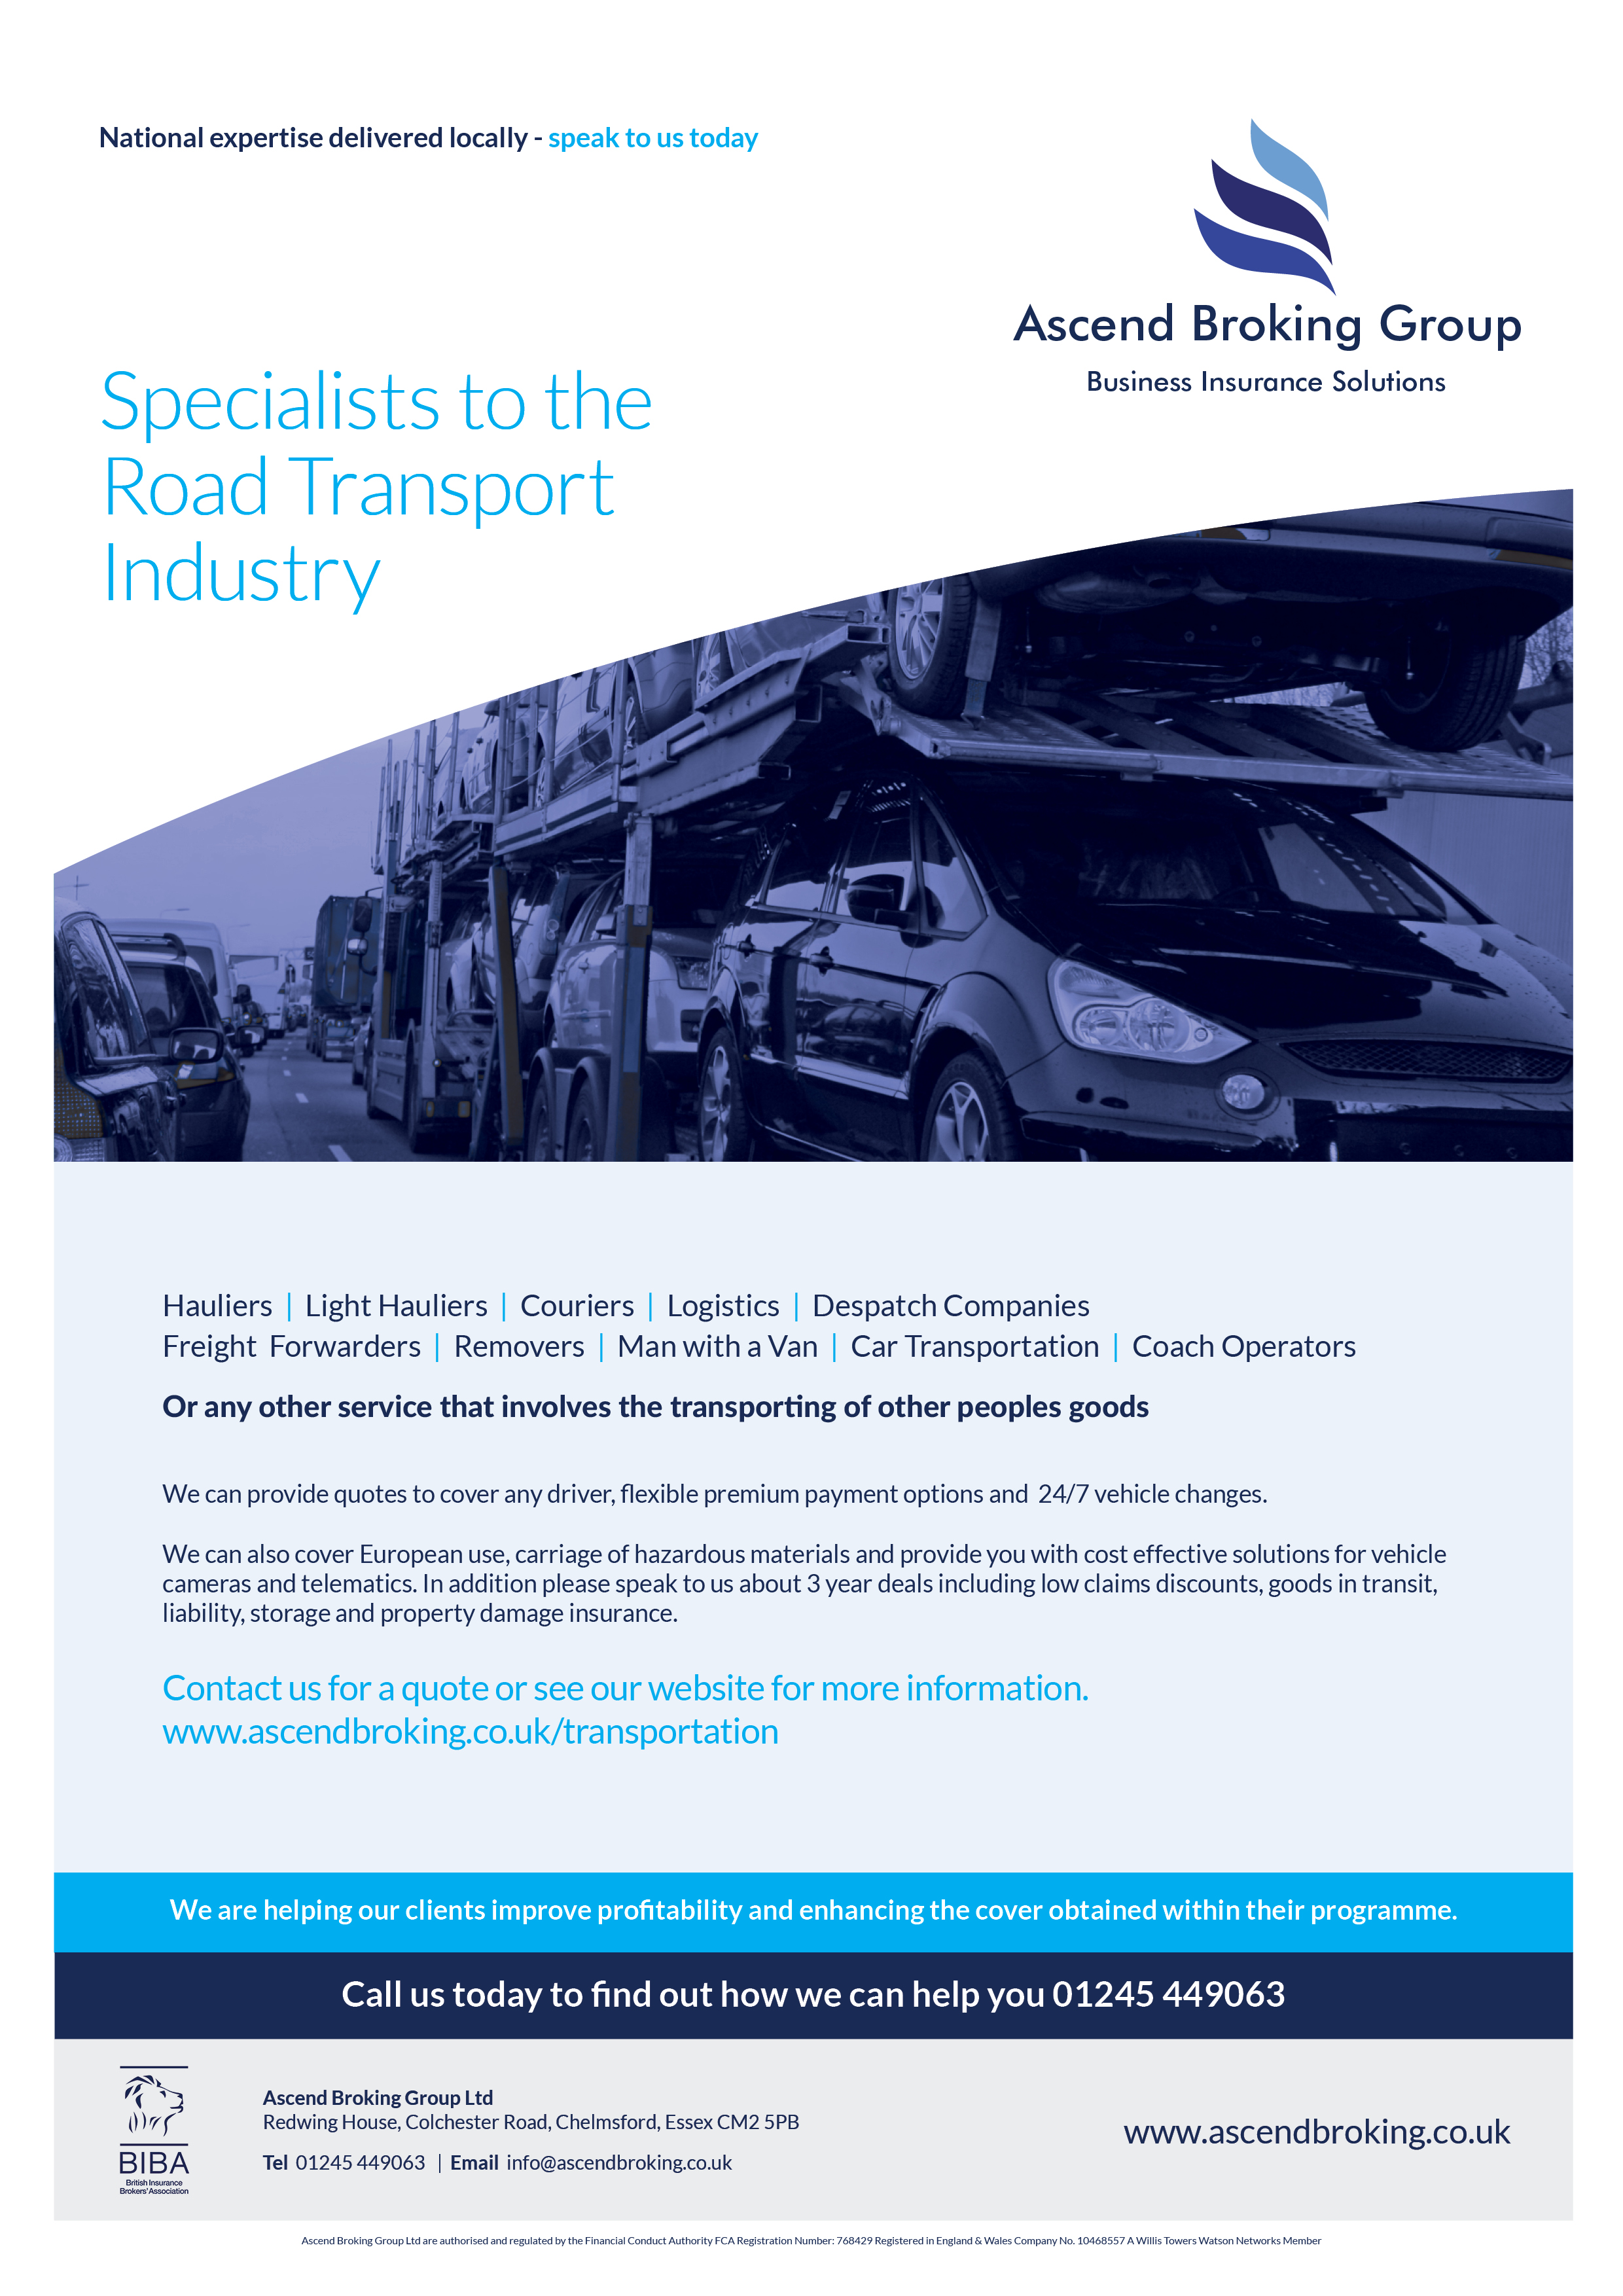 Specialists to the Road Transport Industry